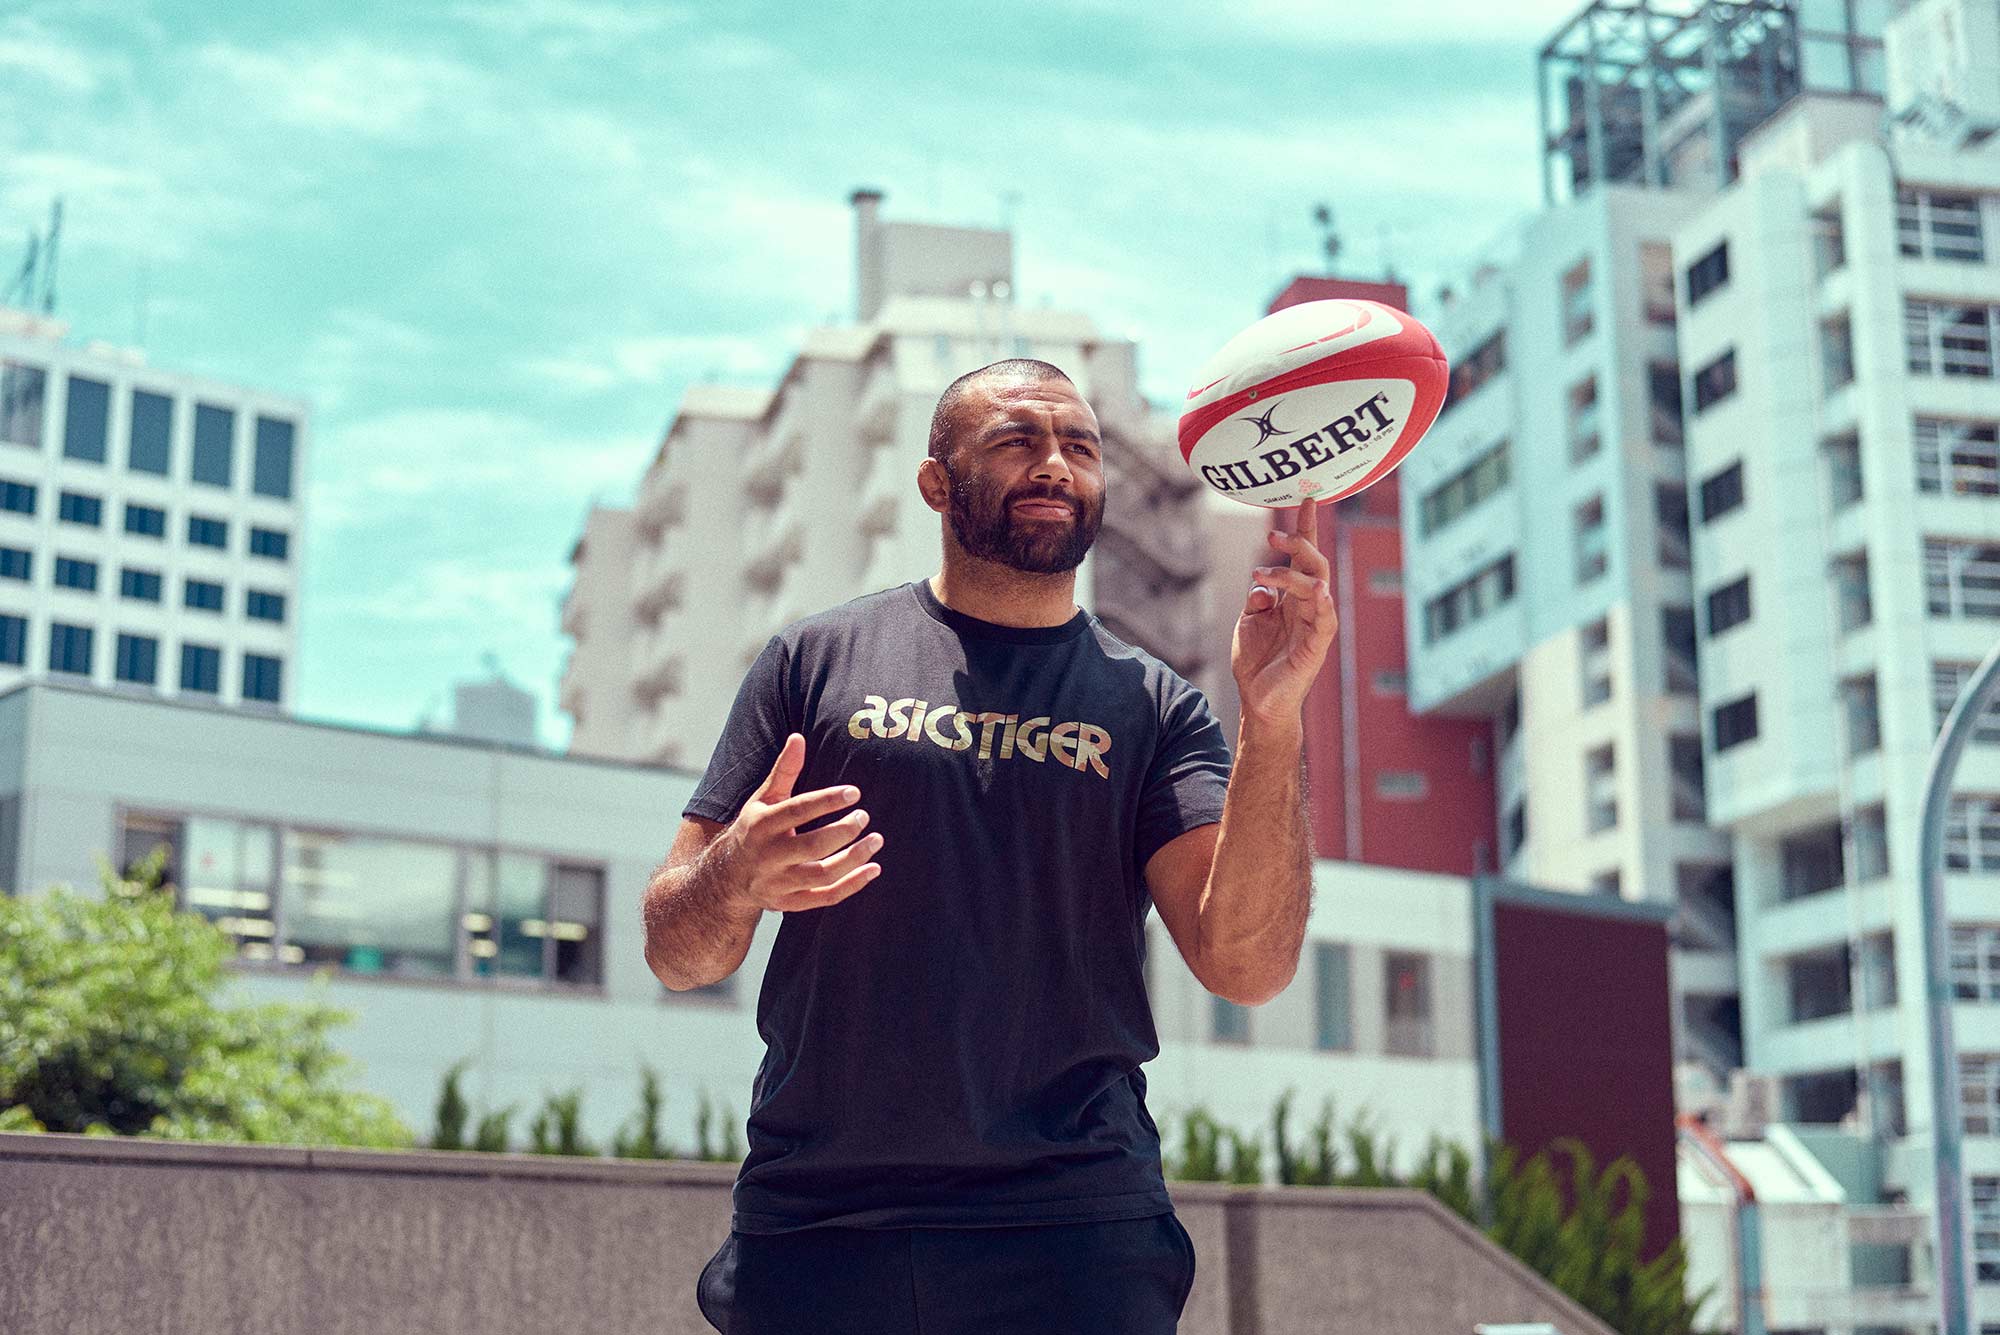 Asics Japan take their photoshoot to the street with Rugby Star Michael Leech ahead of the rugby world cup campaign